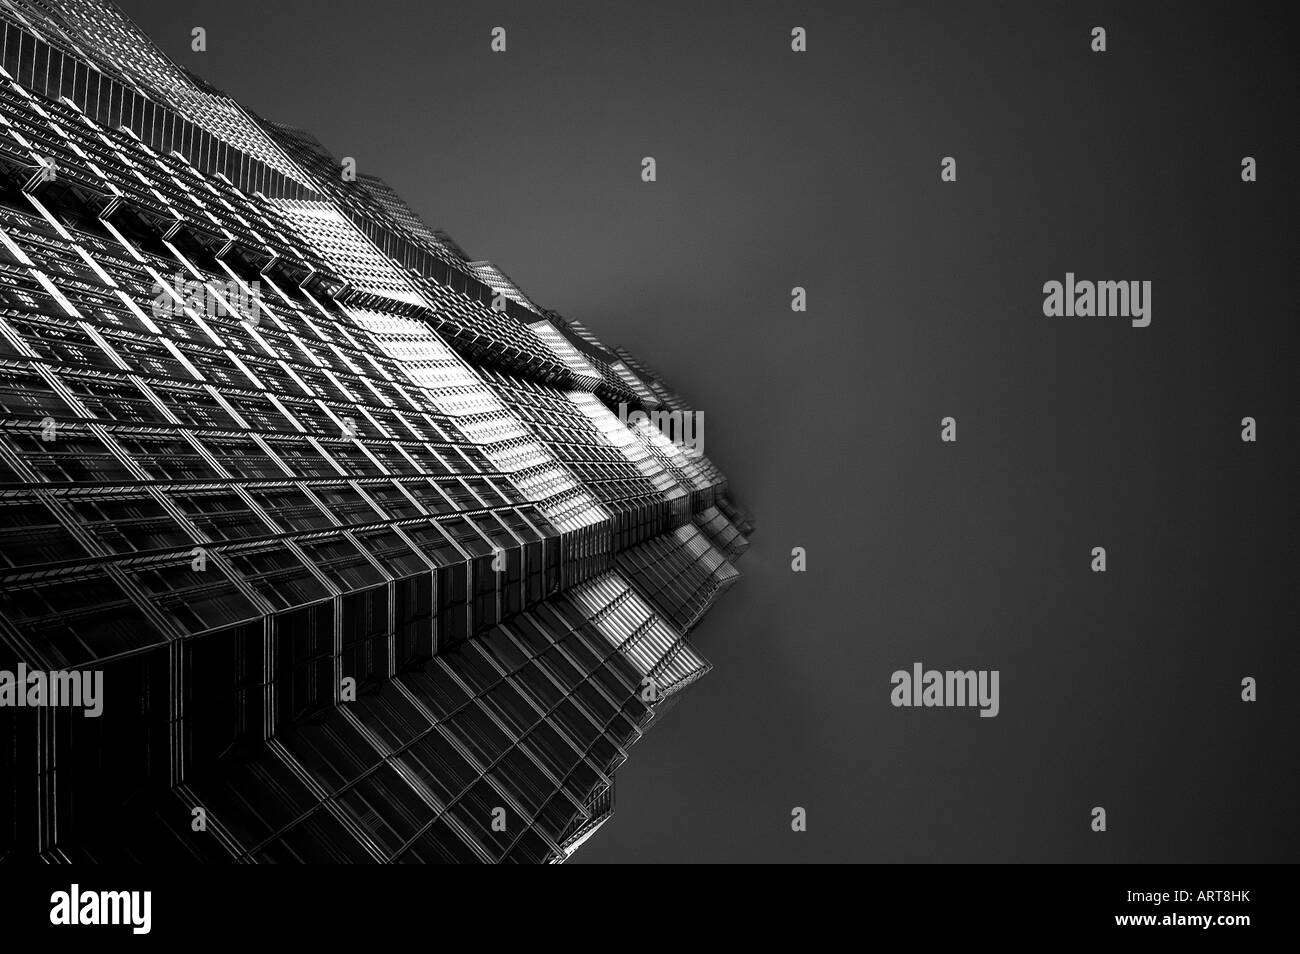 Jin mau Black and White Stock Photos & Images - Alamy